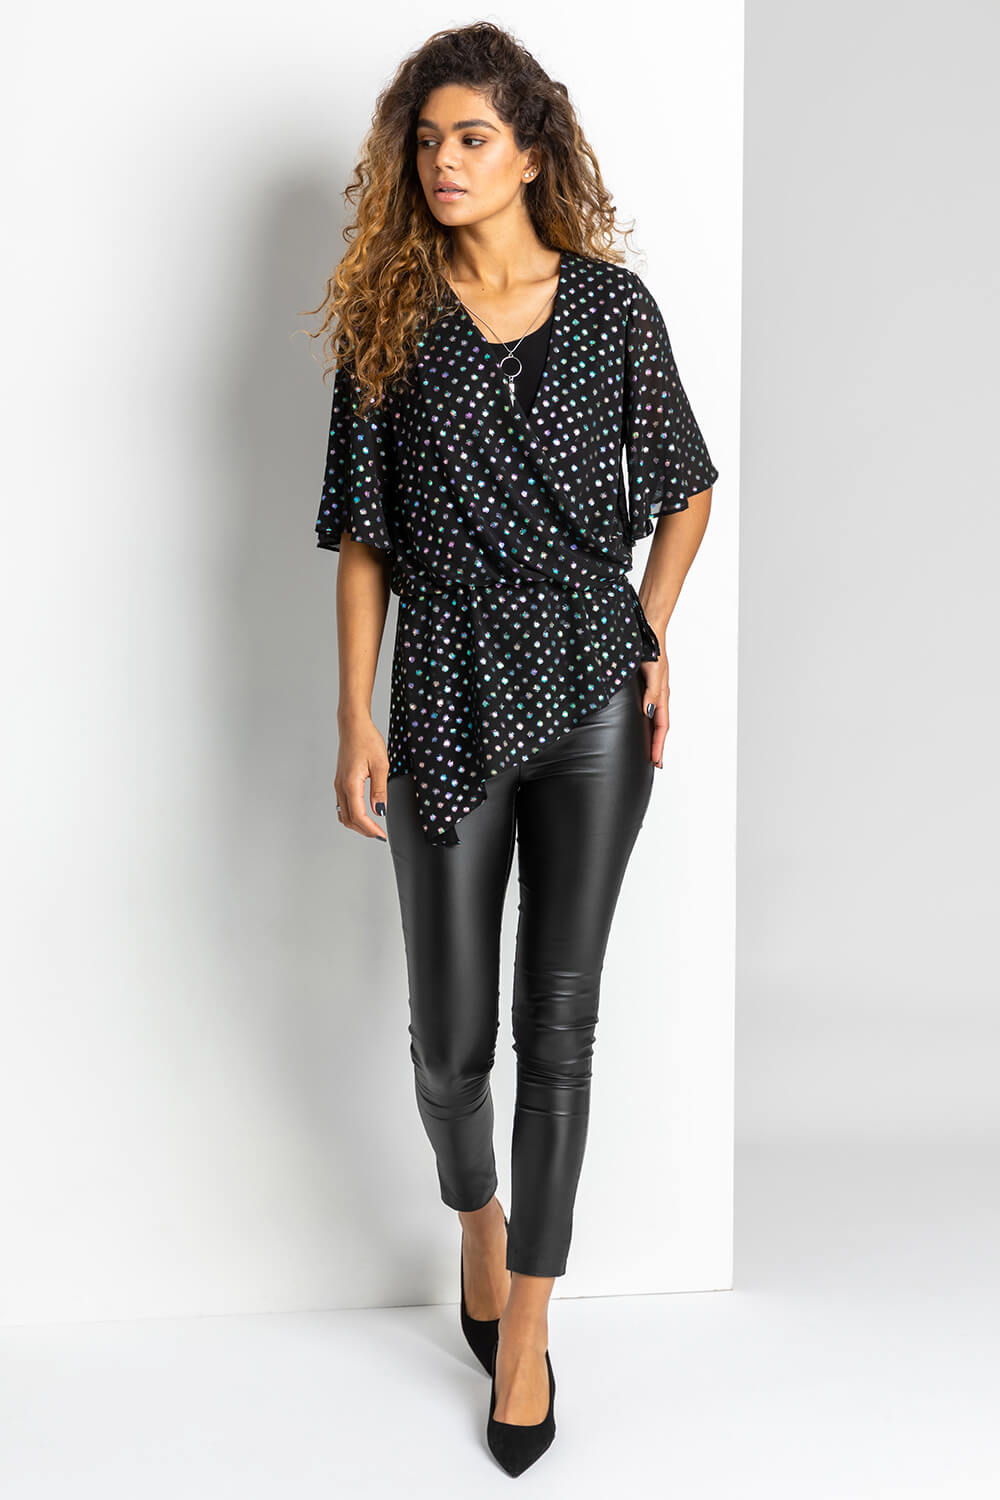 Black Foil Spot Print Top and Necklace, Image 3 of 4